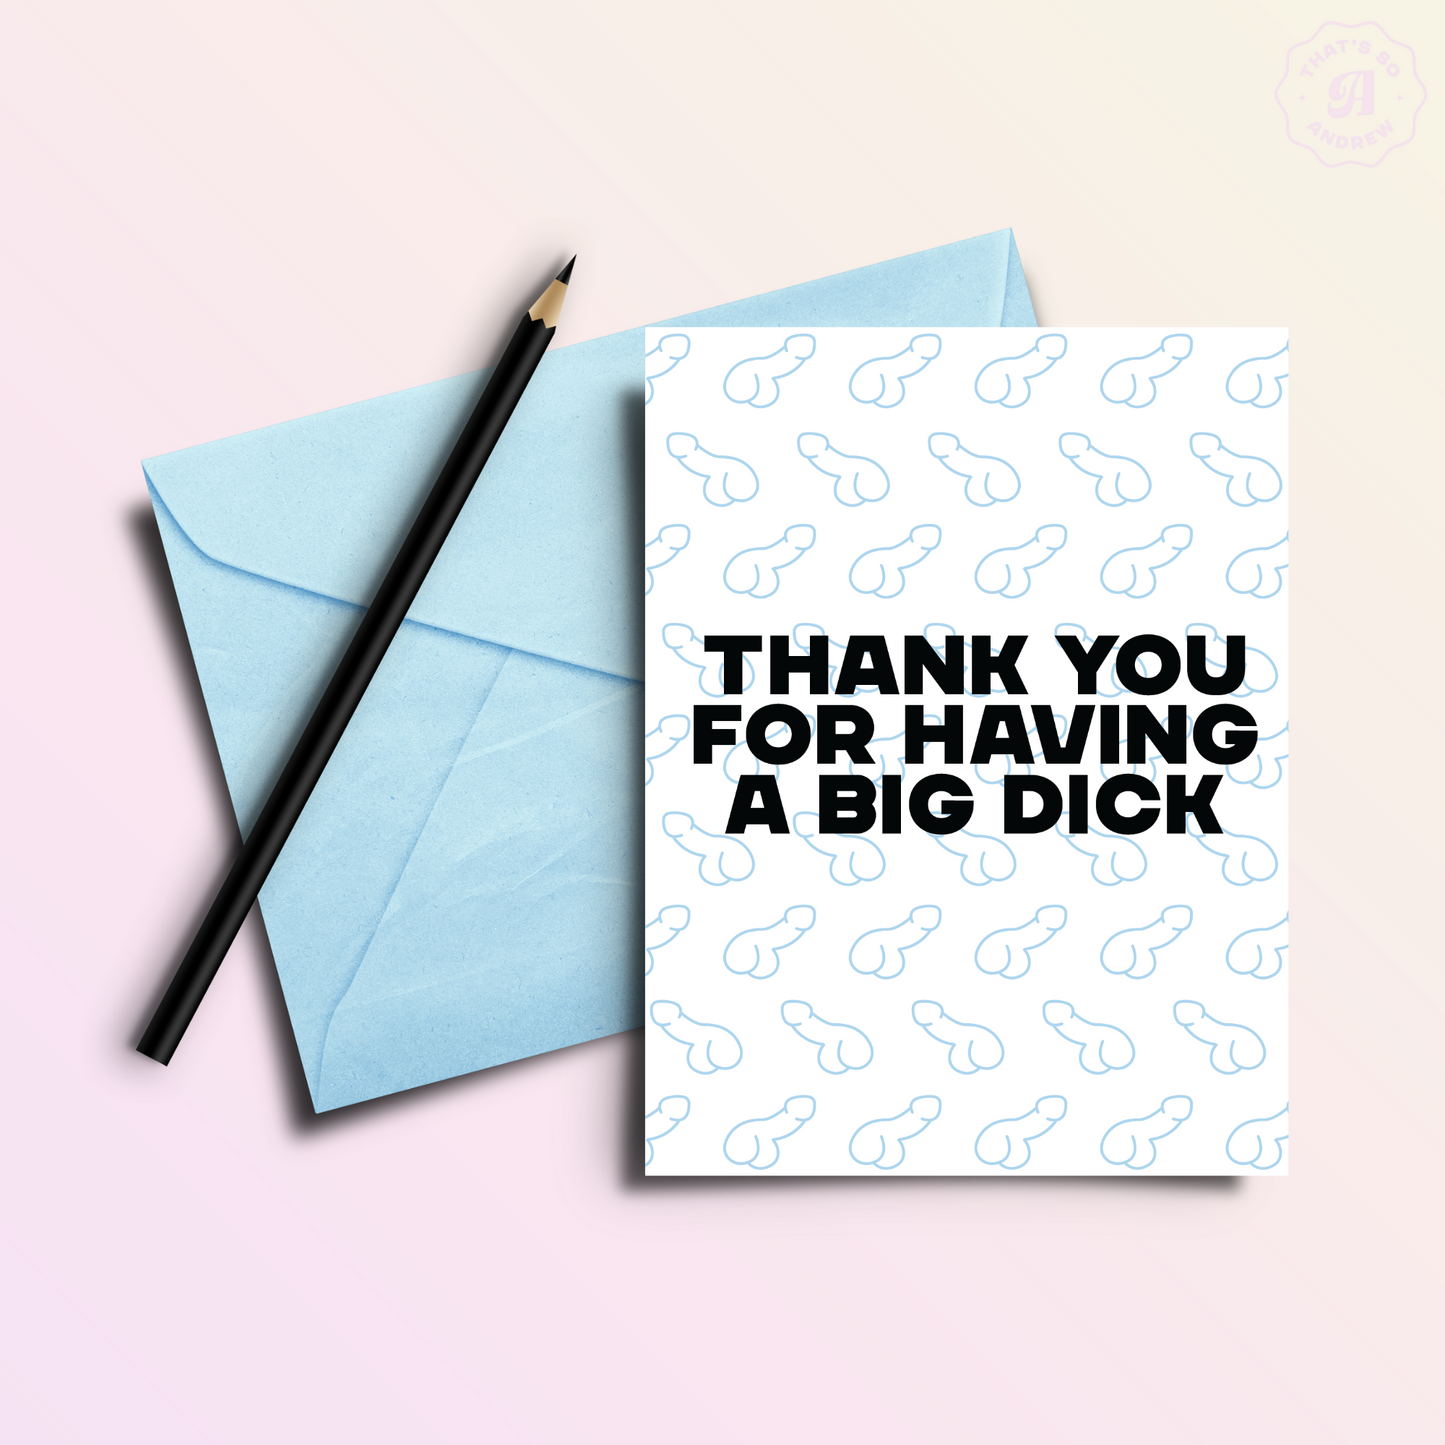 Big DIck | Funny and Dirty Greeting Card